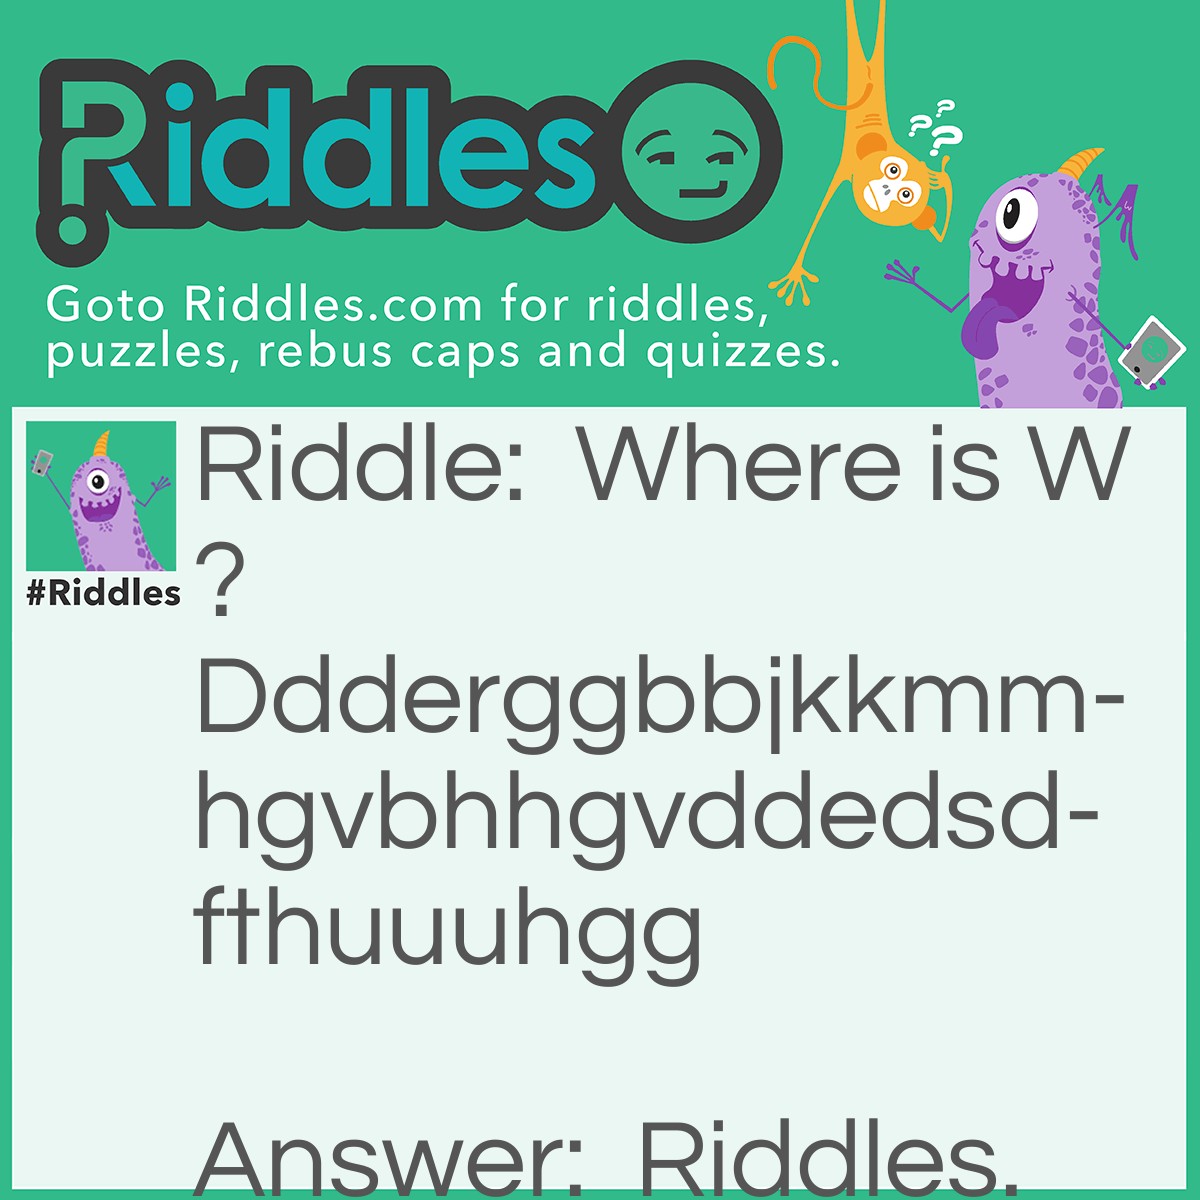 Riddle: Where is W? Ddderggbbjkkmmhgvbhhgvddedsdfthuuuhgg Answer: At the end of the question